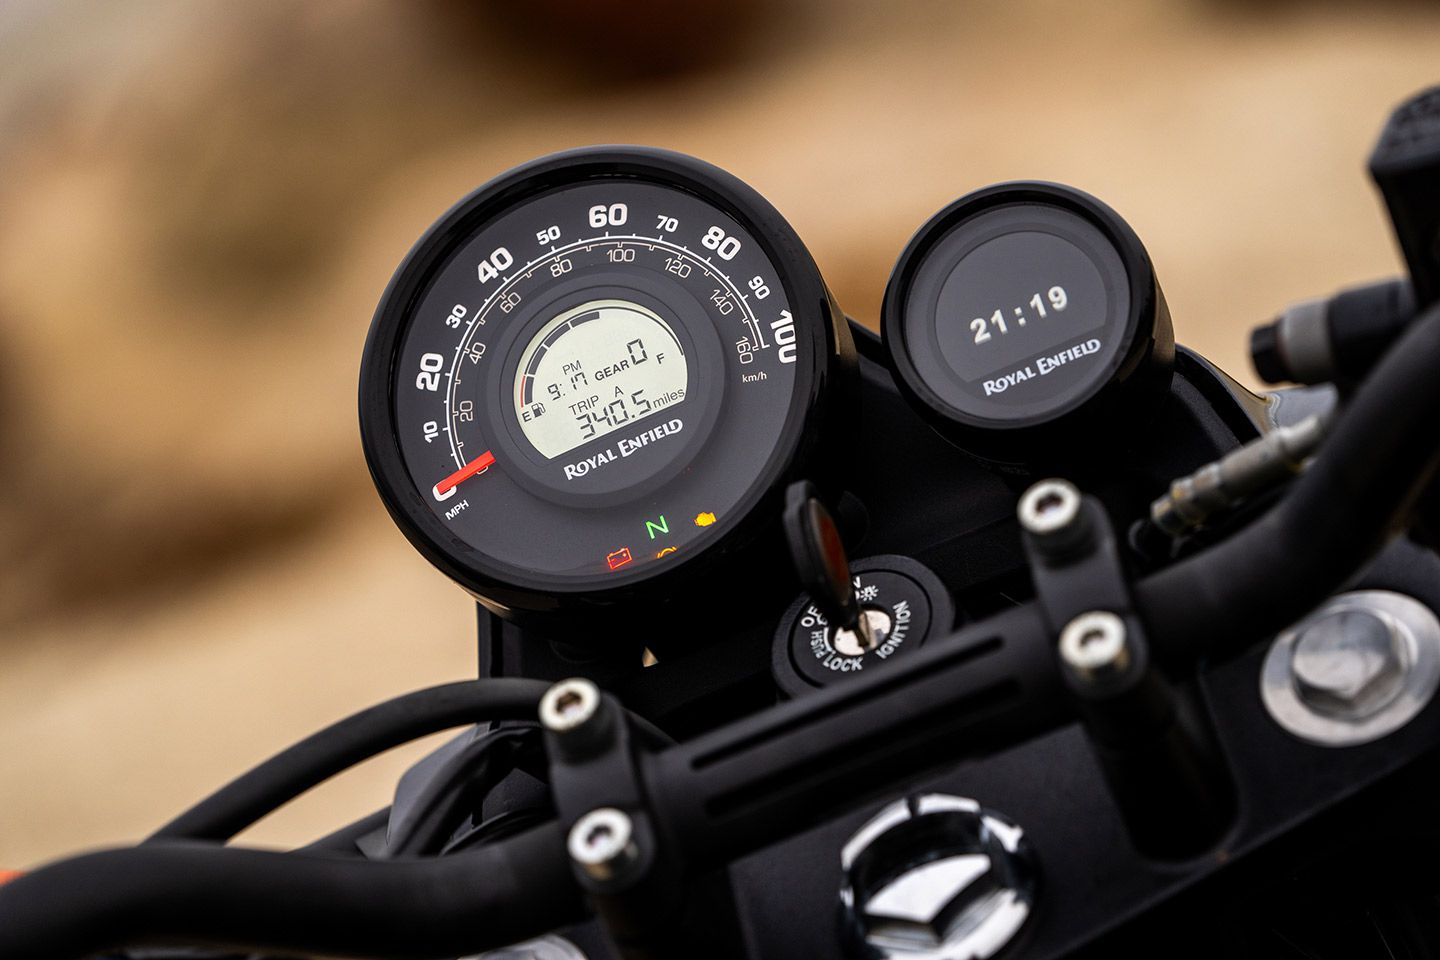 Instrumentation is tastefully styled and functional. The main instrument pod is flanked by a handy smartphone-app-powered (Royal Enfield Tripper) navigation display.